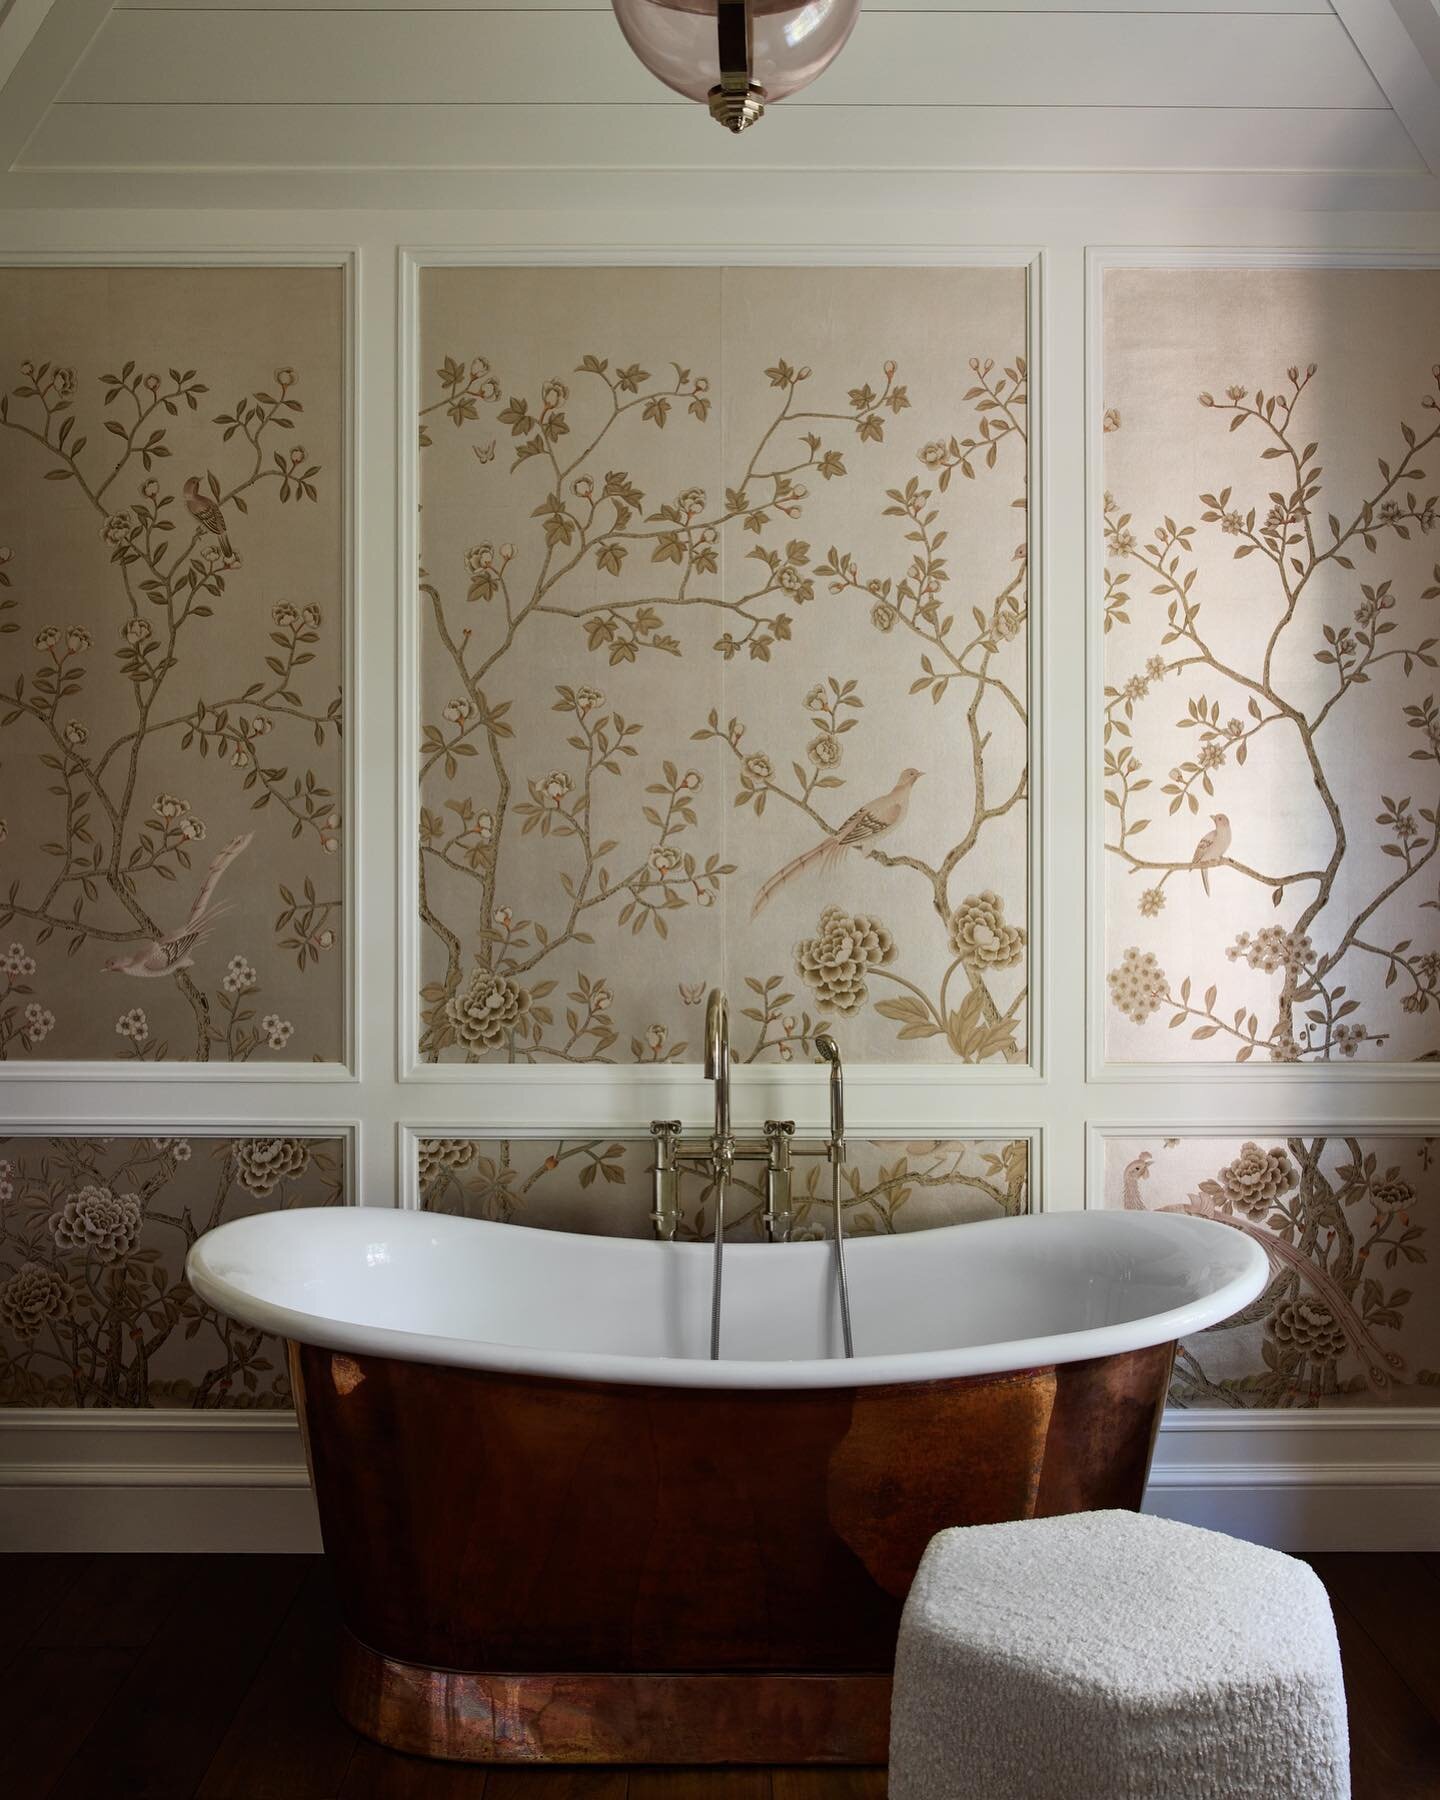 This luxurious primary bath is all about creating a spa-like atmosphere with a touch of opulence, and the deep soaking tub is the center of attention. The tub itself is a work of art, with a copper finish which is complimented by this handpainted @de